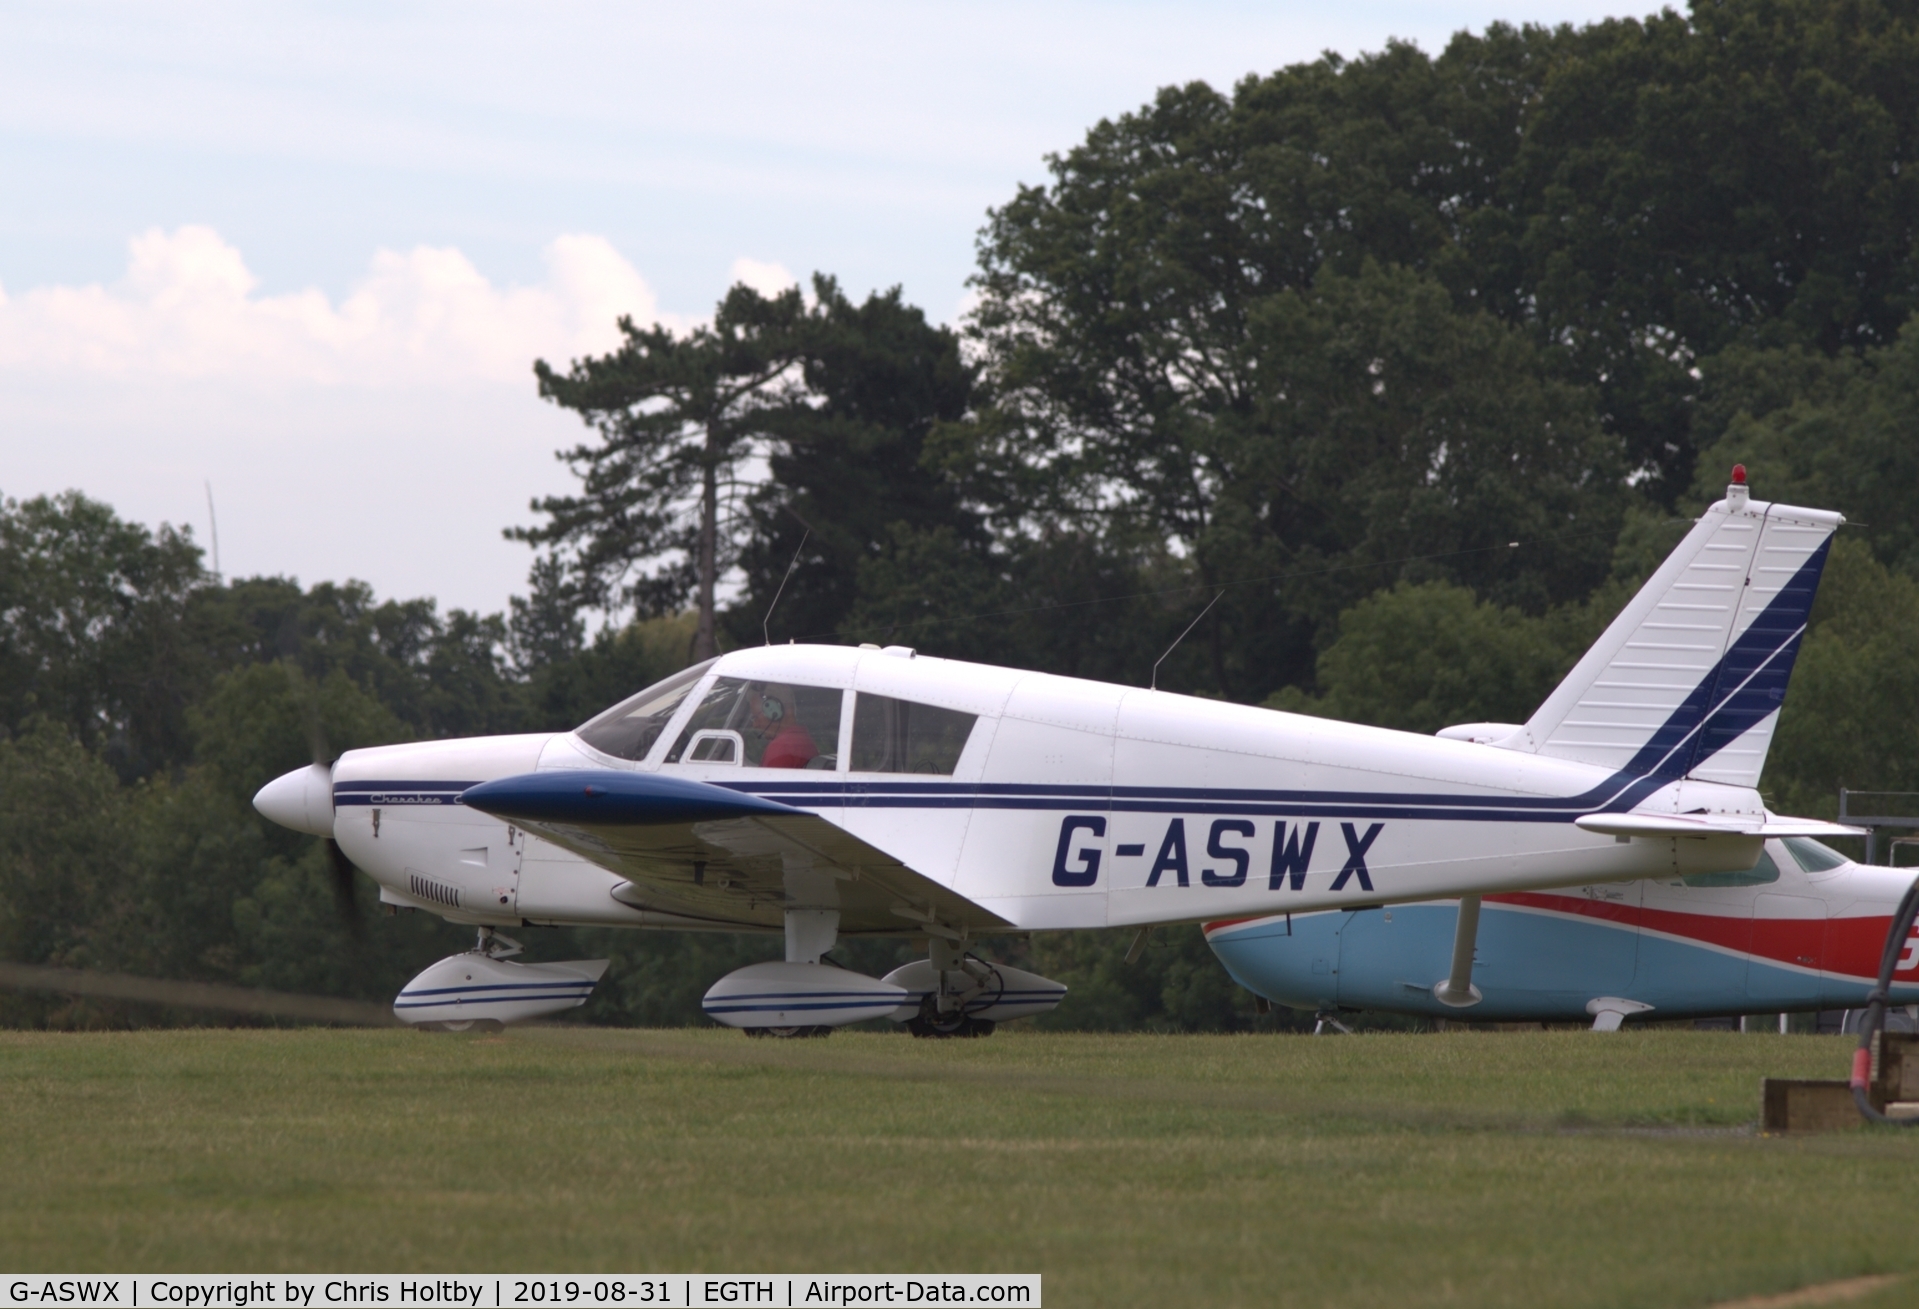 G-ASWX, 1964 Piper PA-28-180 Cherokee C/N 28-1932, Cherokee taxiing to park at Old Warden